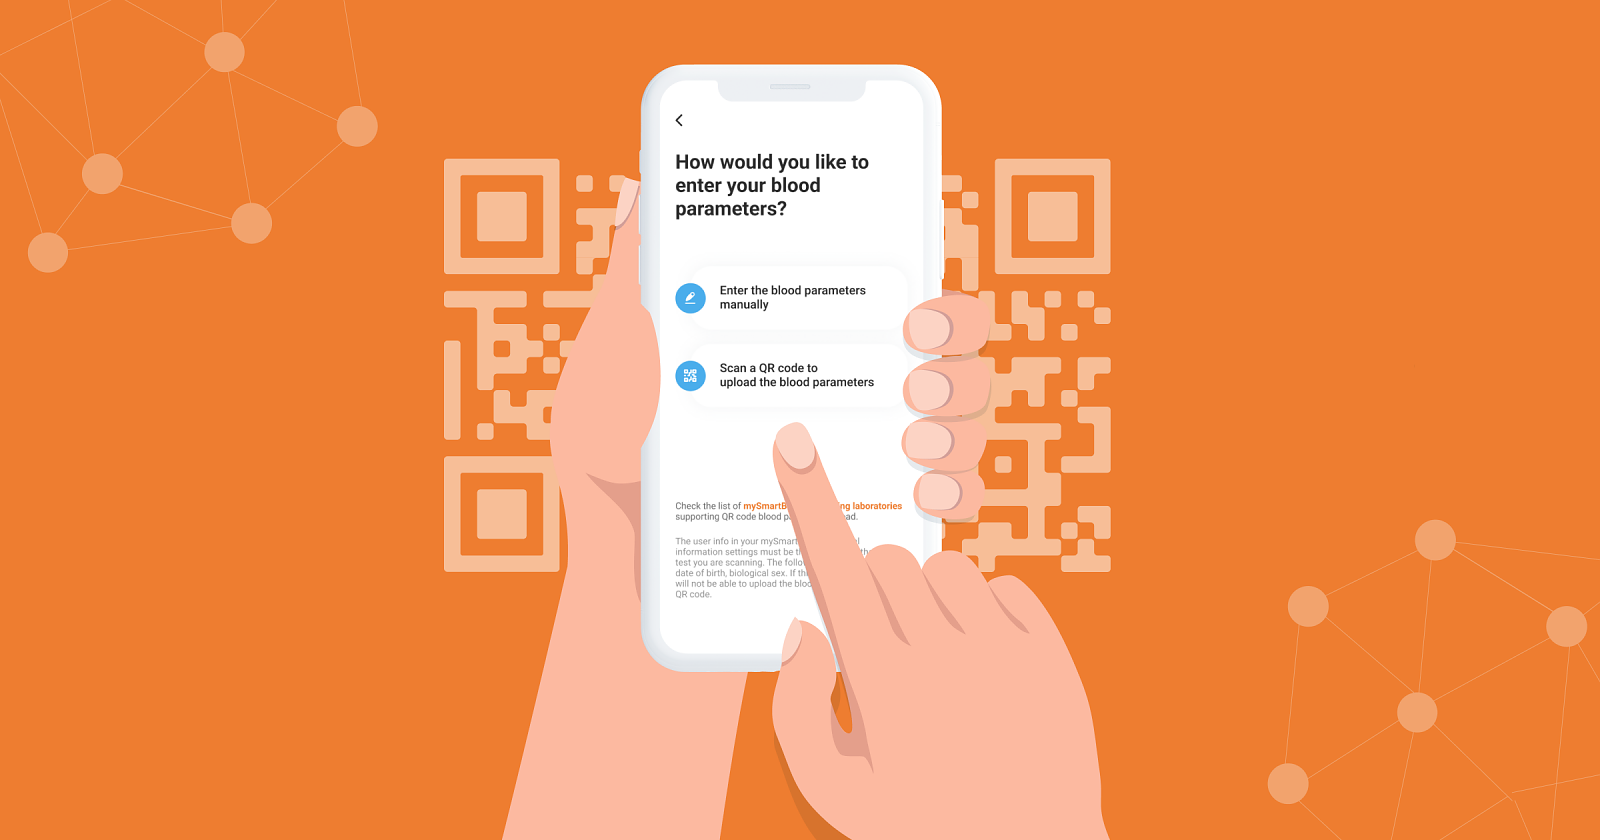 mySmartBlood has a new feature, and it's all about QR codes! 